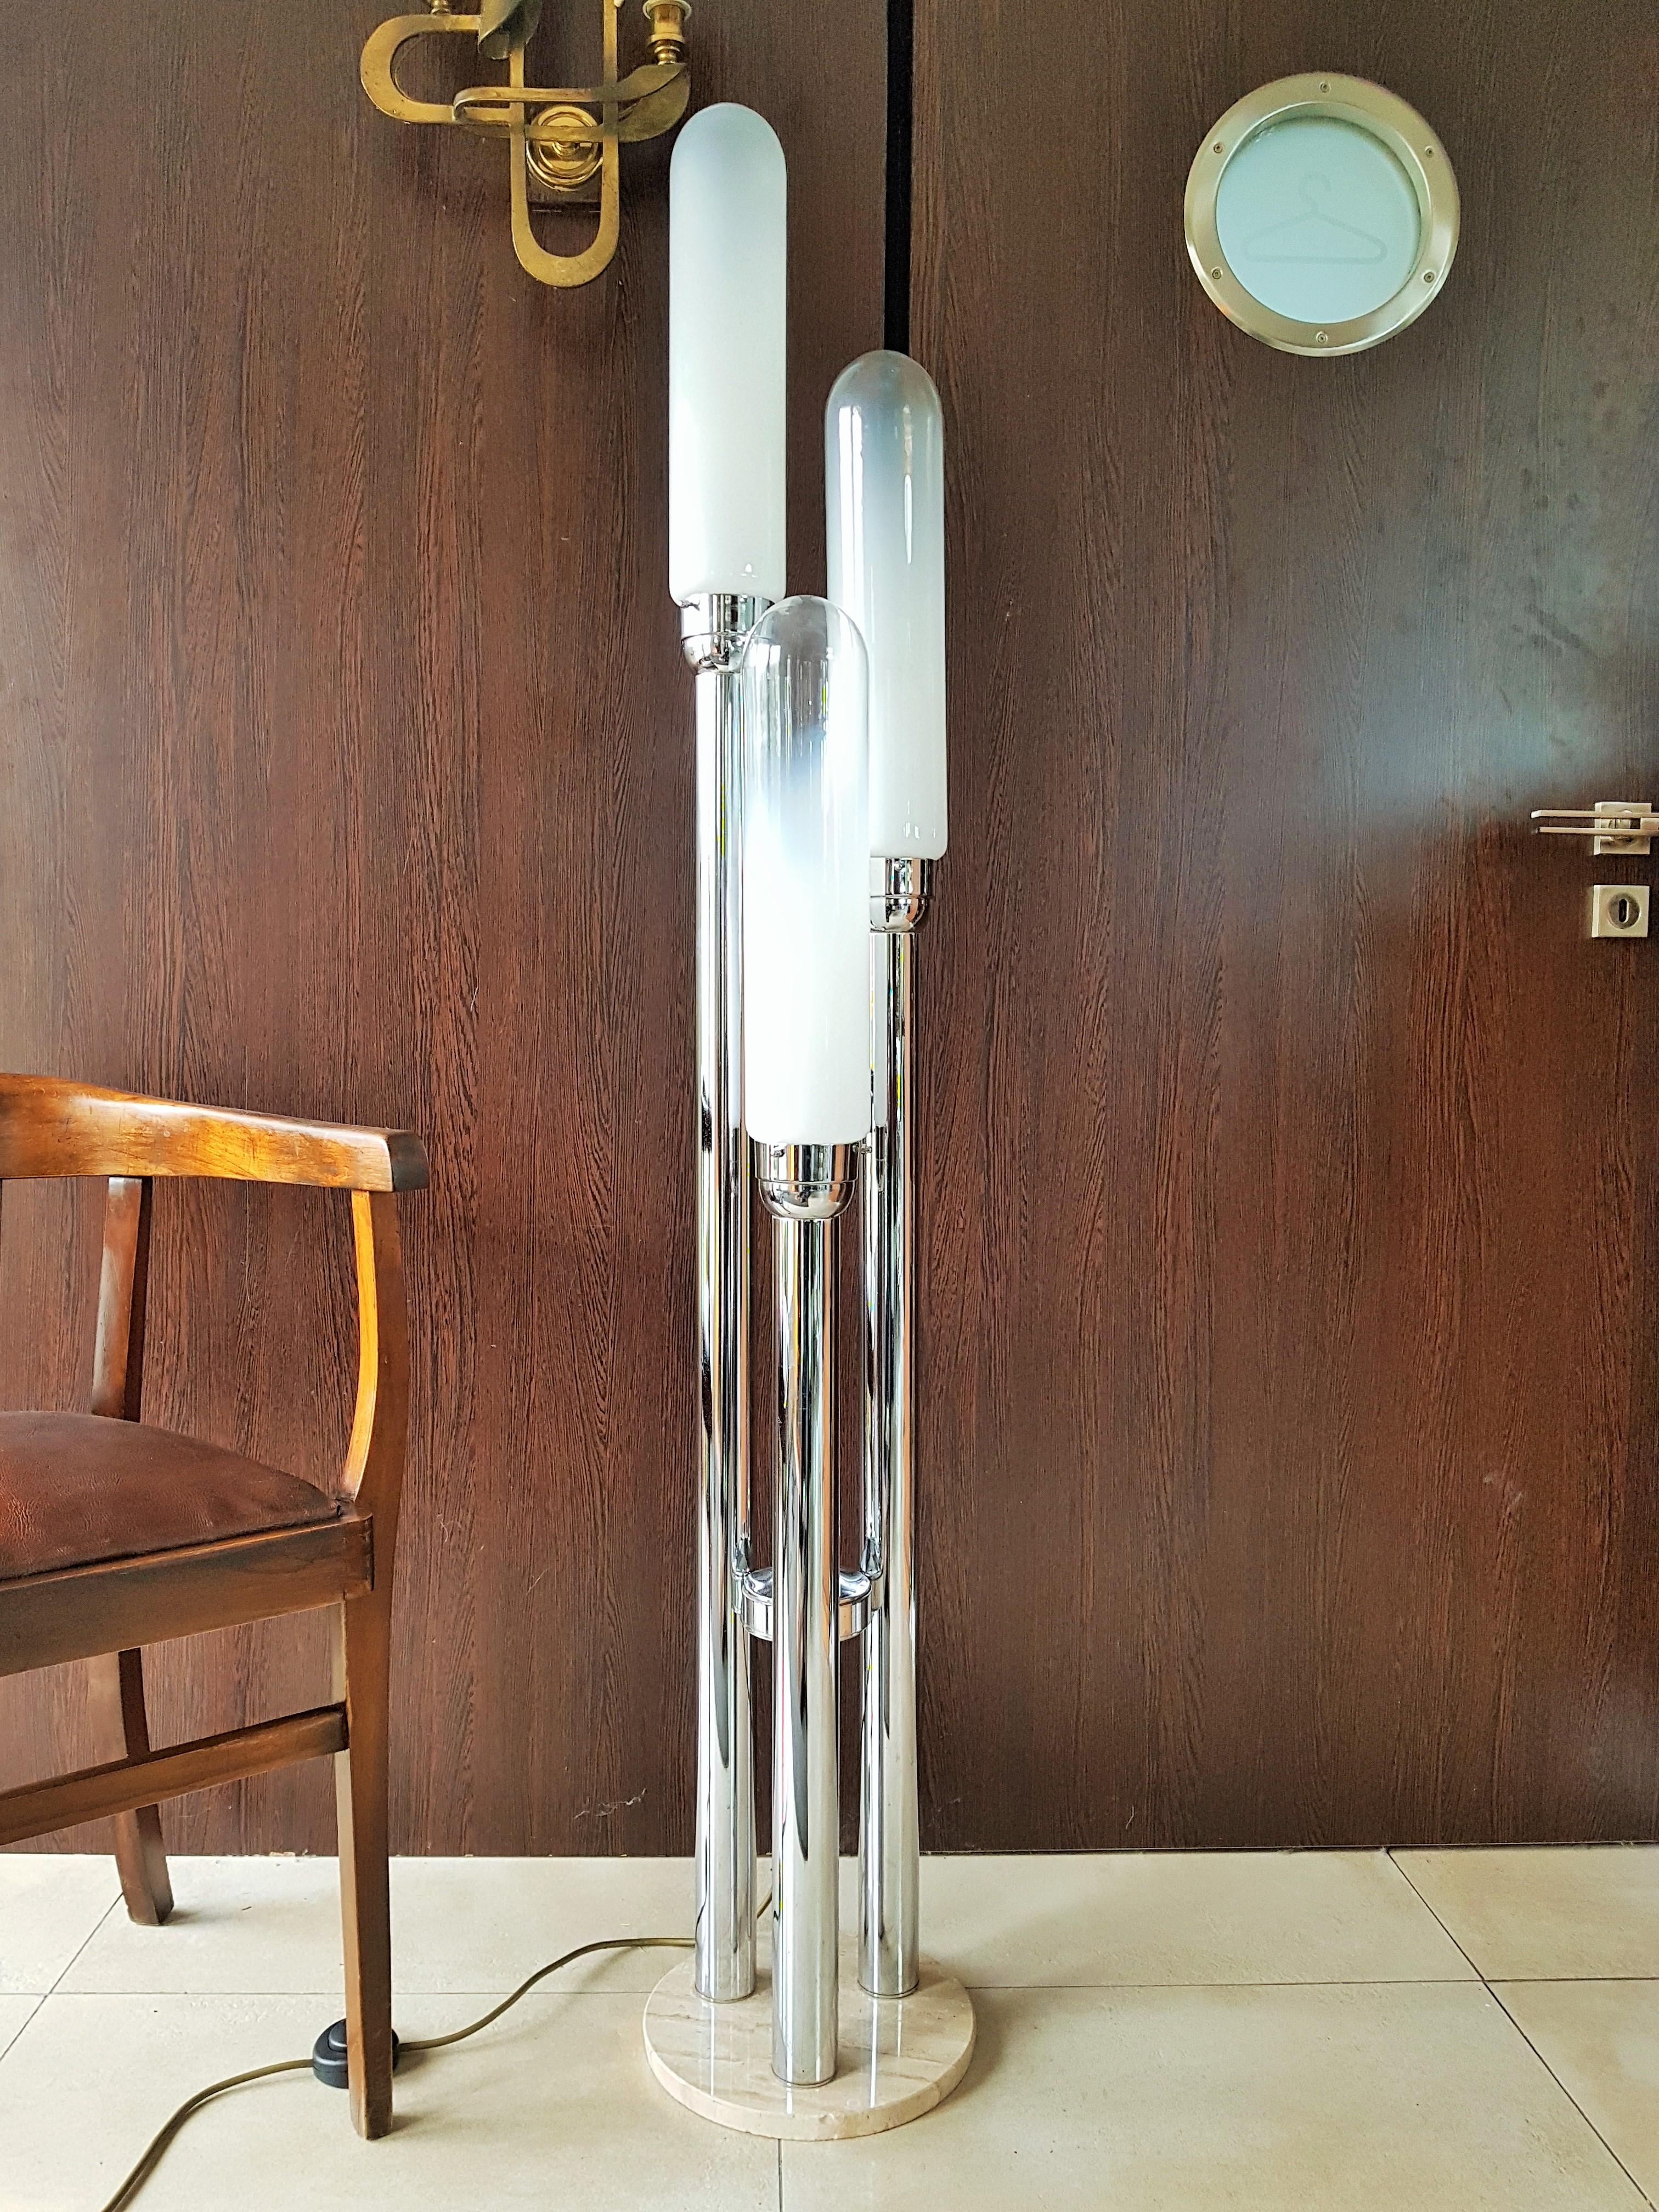 Midcentury floor lamp by Carlo Nason for Mazzega, Italy, 1960s.
Marble base. Original chrome in good condition.